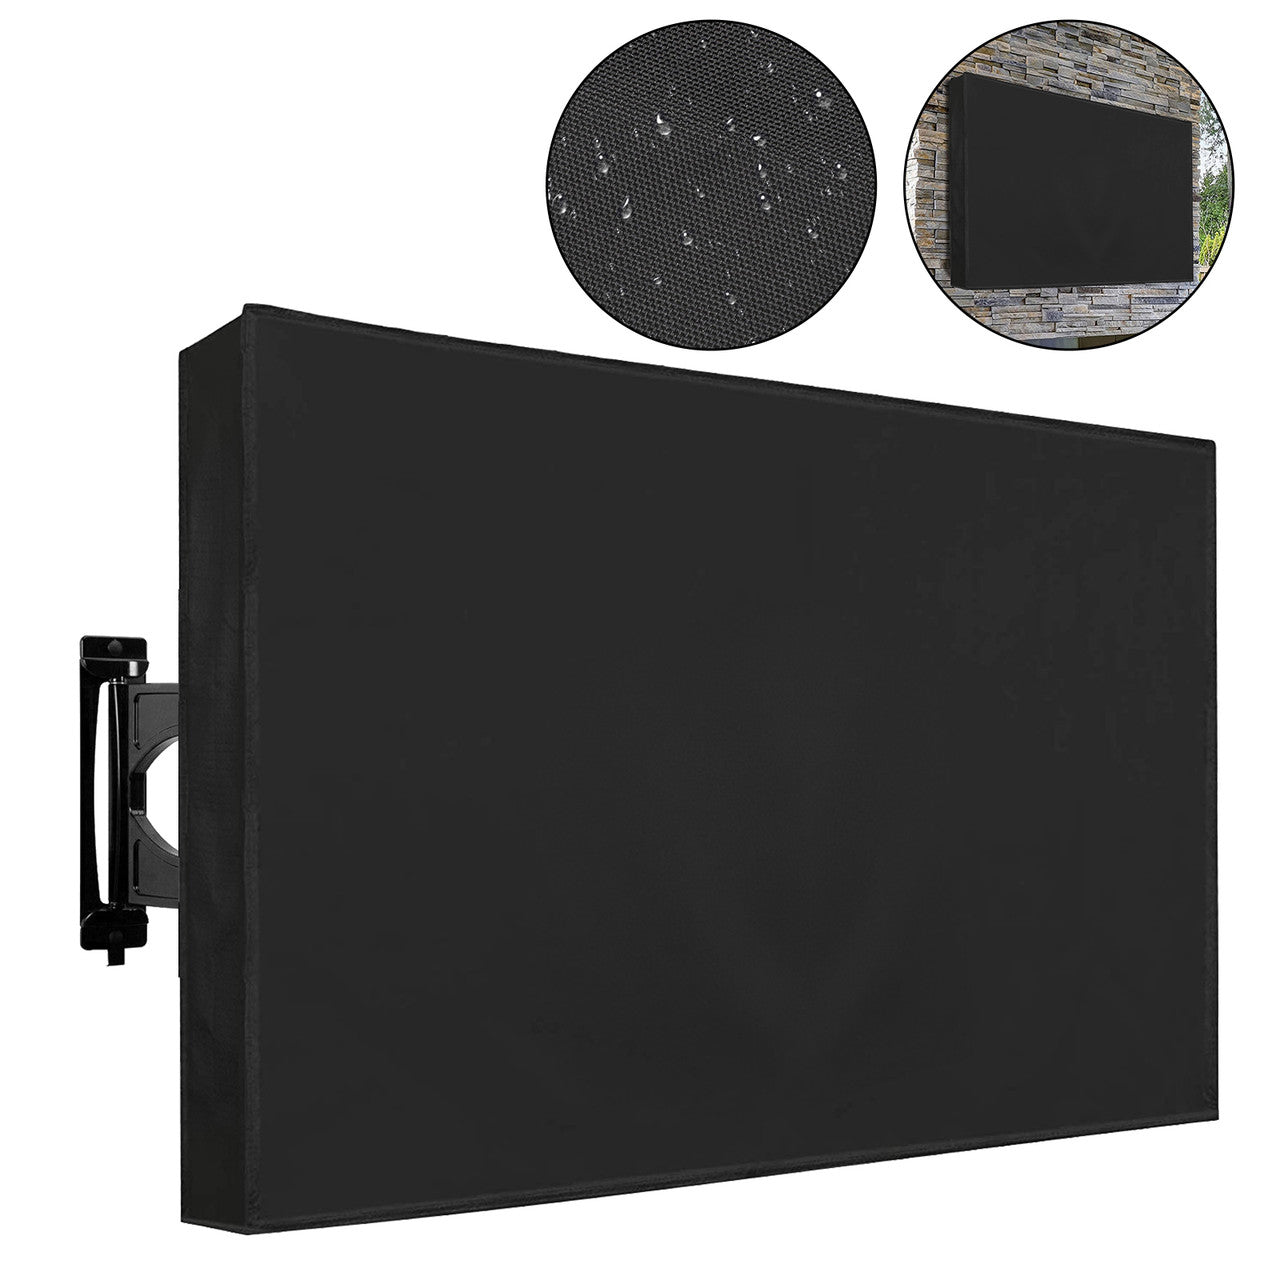 Outdoor TV Cover Weatherproof for 40-42 inch TV, Waterproof and Dustproof TV Screen Protectors for Outside LED, LCD, OLED Flat Screen TVs